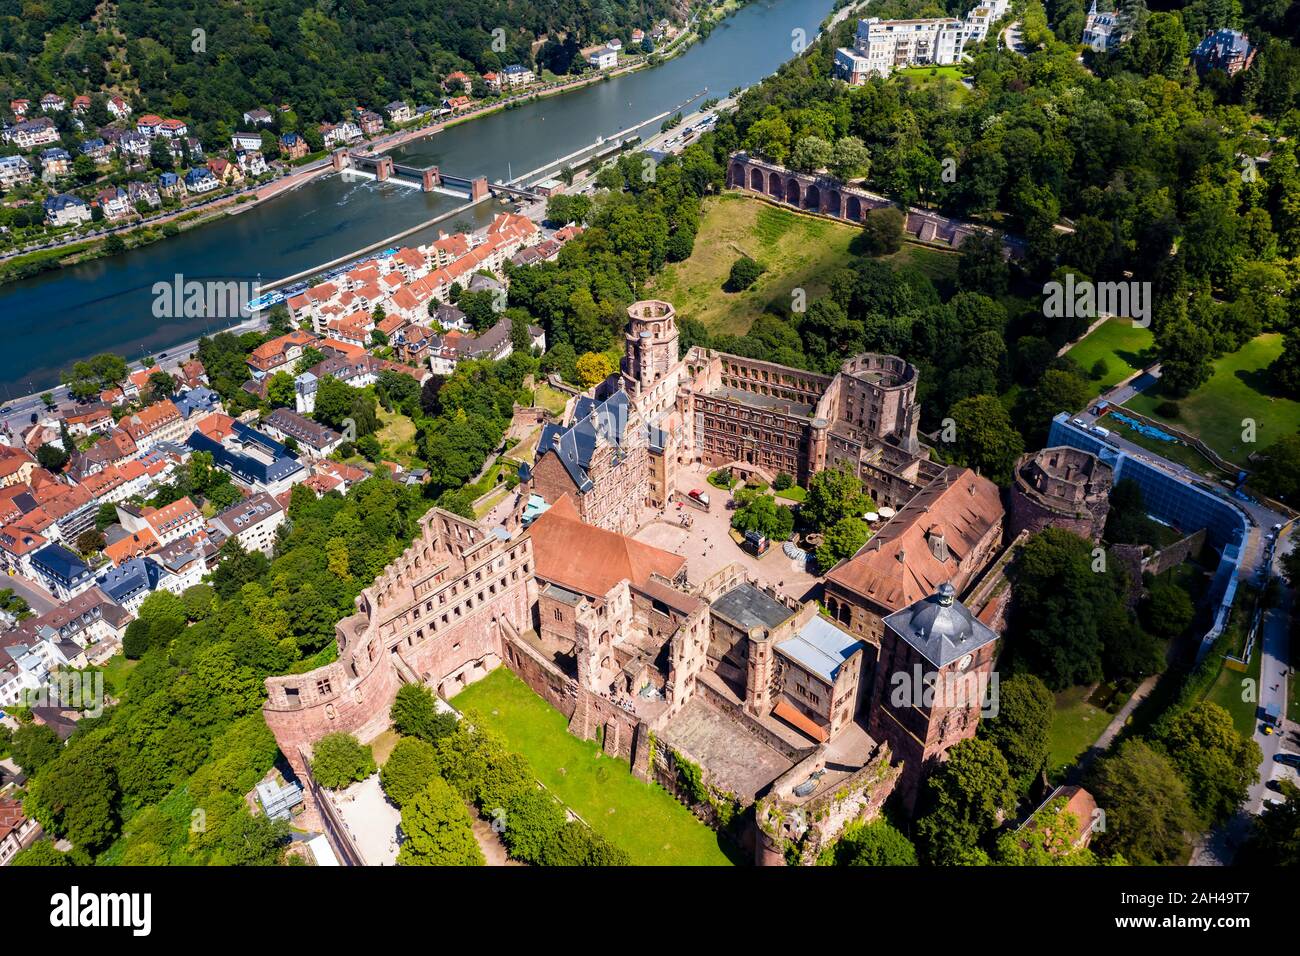 Germany, Baden-Wurttemberg, Aerial view of Heidelberg with castle and river Neckar Stock Photo